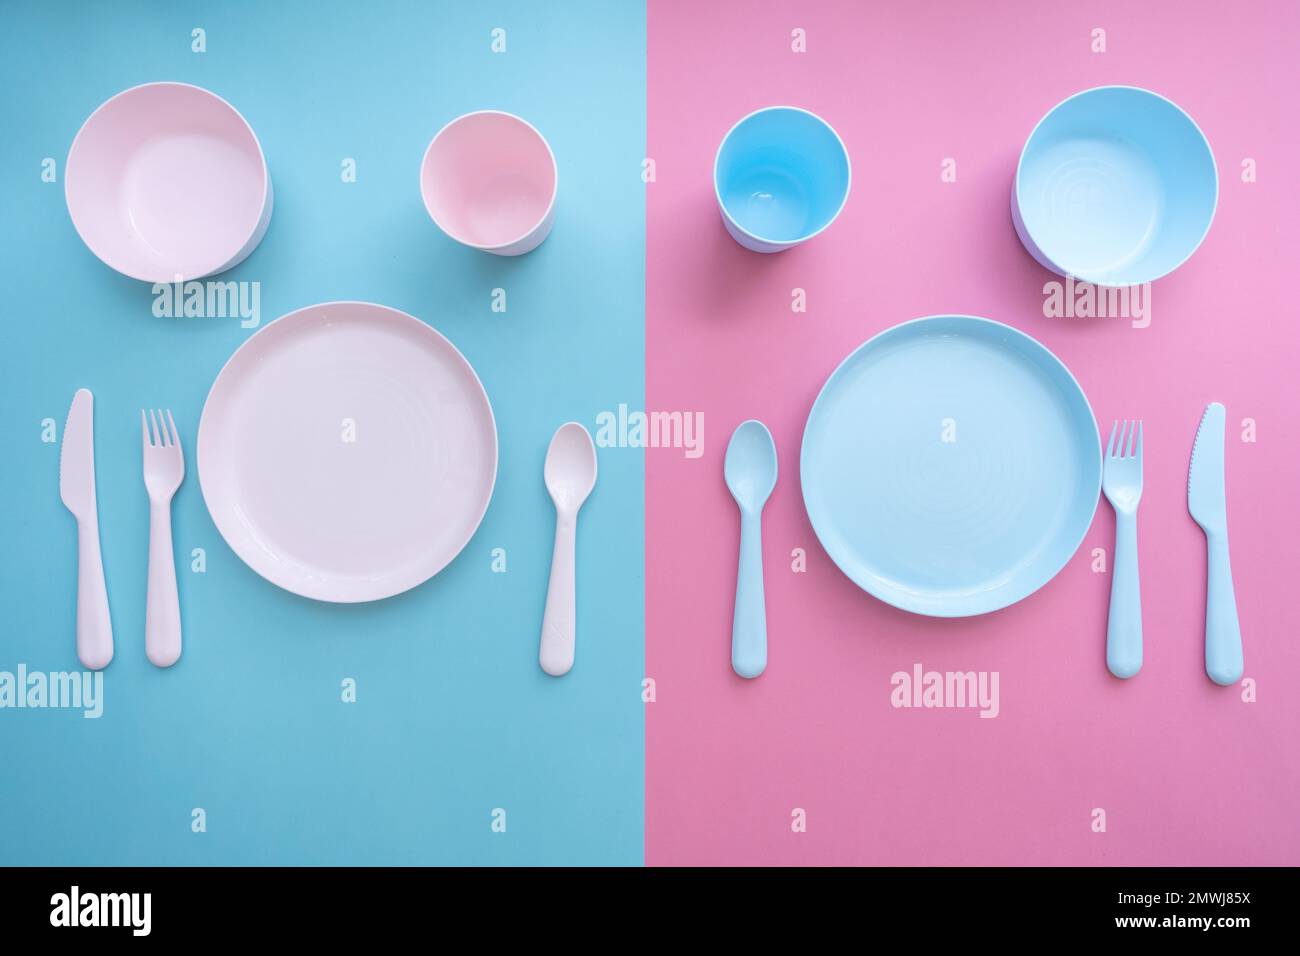 Flat lay baby feeding set. Sippy cup, plate, bowl, cutlery on pastel pink and blue background. Toddler self feeding training, baby weaning concept. Stock Photo